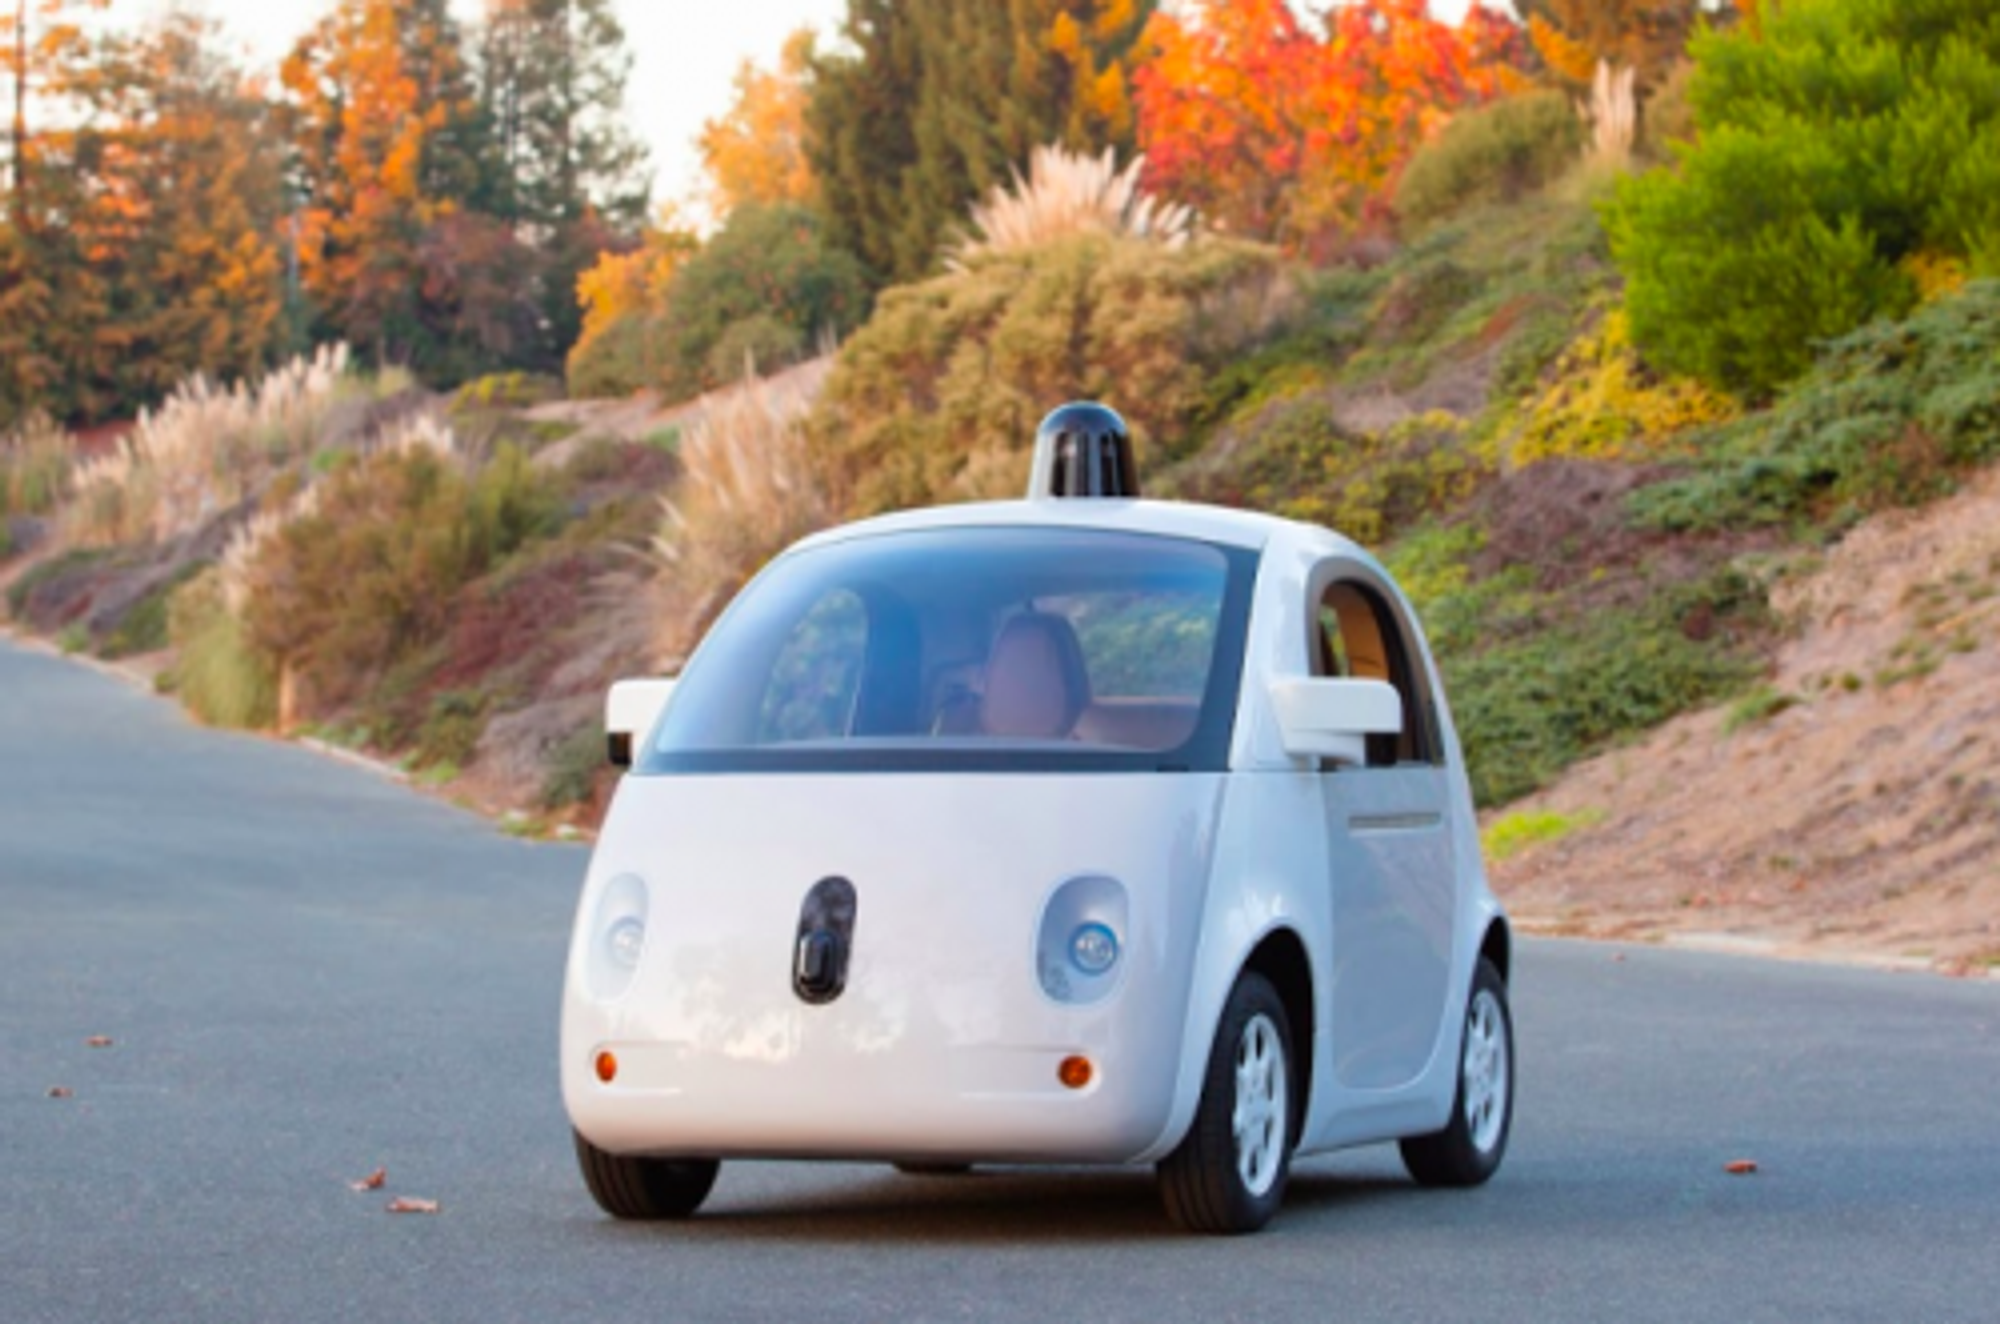 UK public want self-driving cars to be labelled